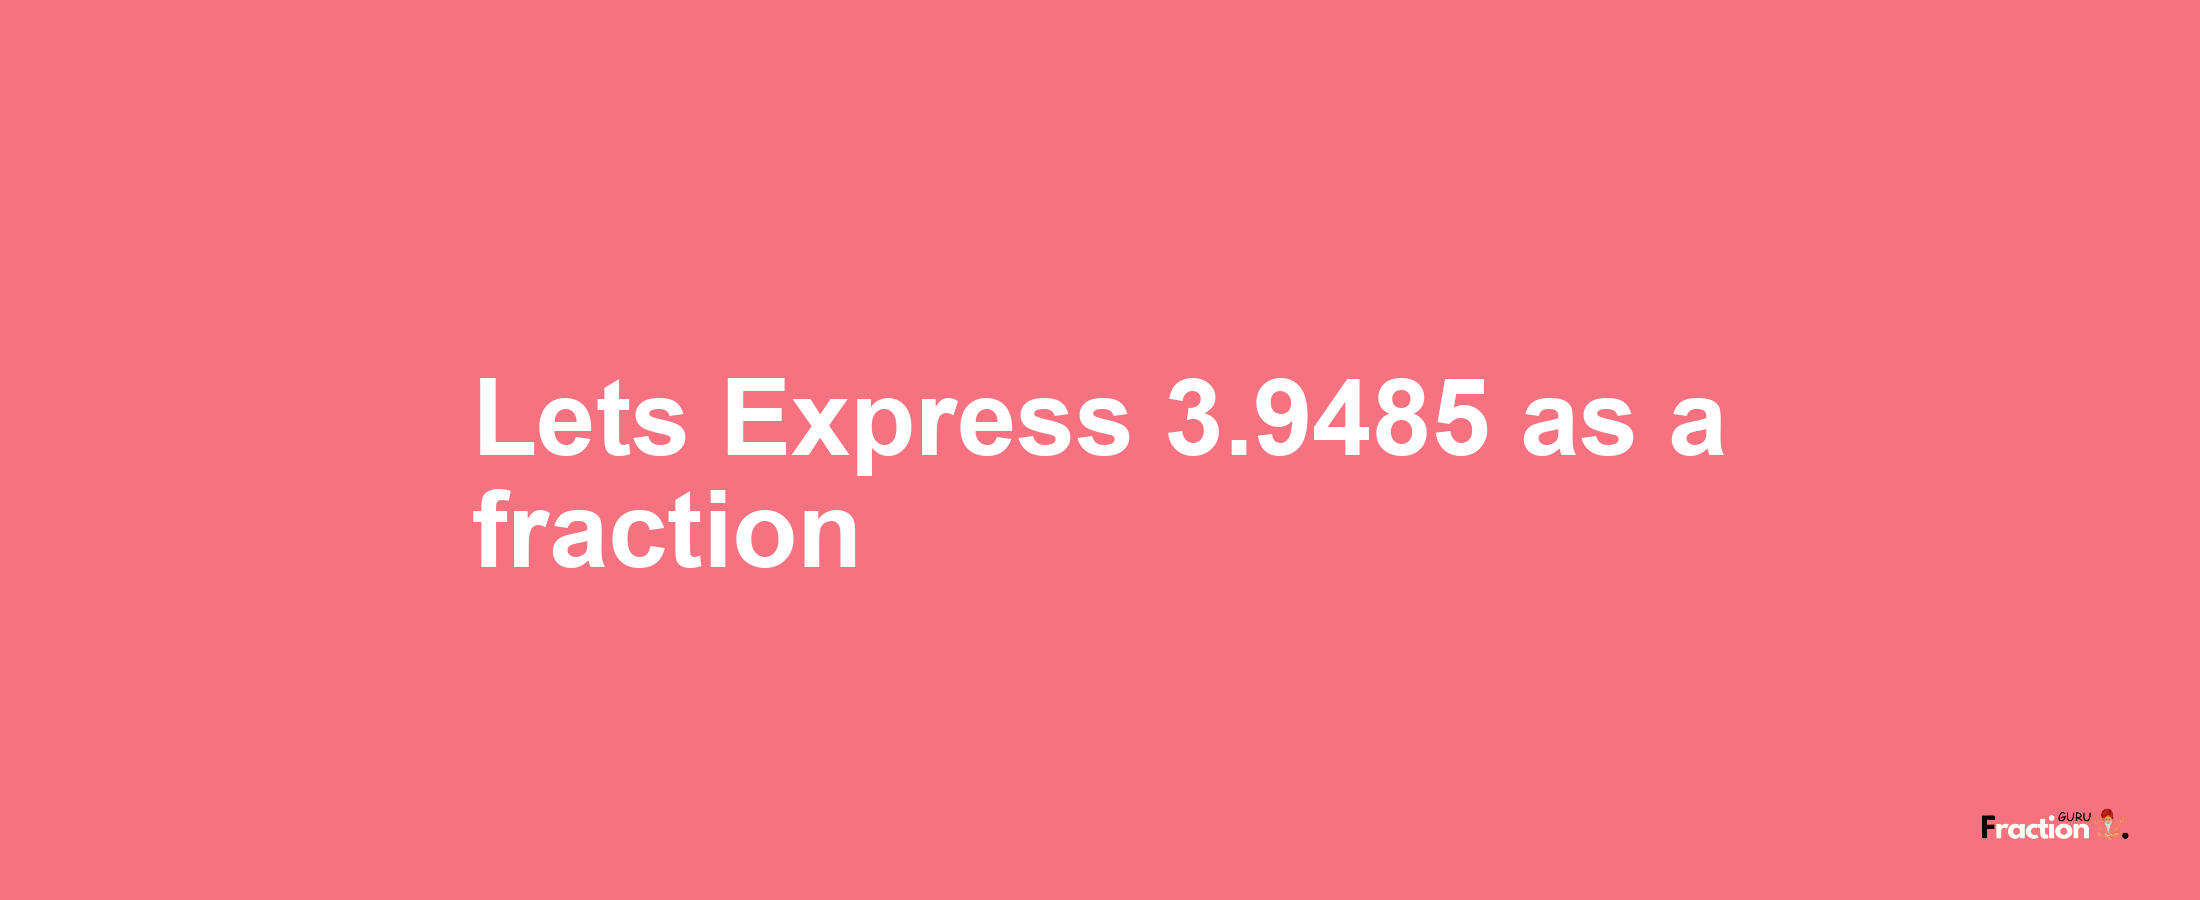 Lets Express 3.9485 as afraction